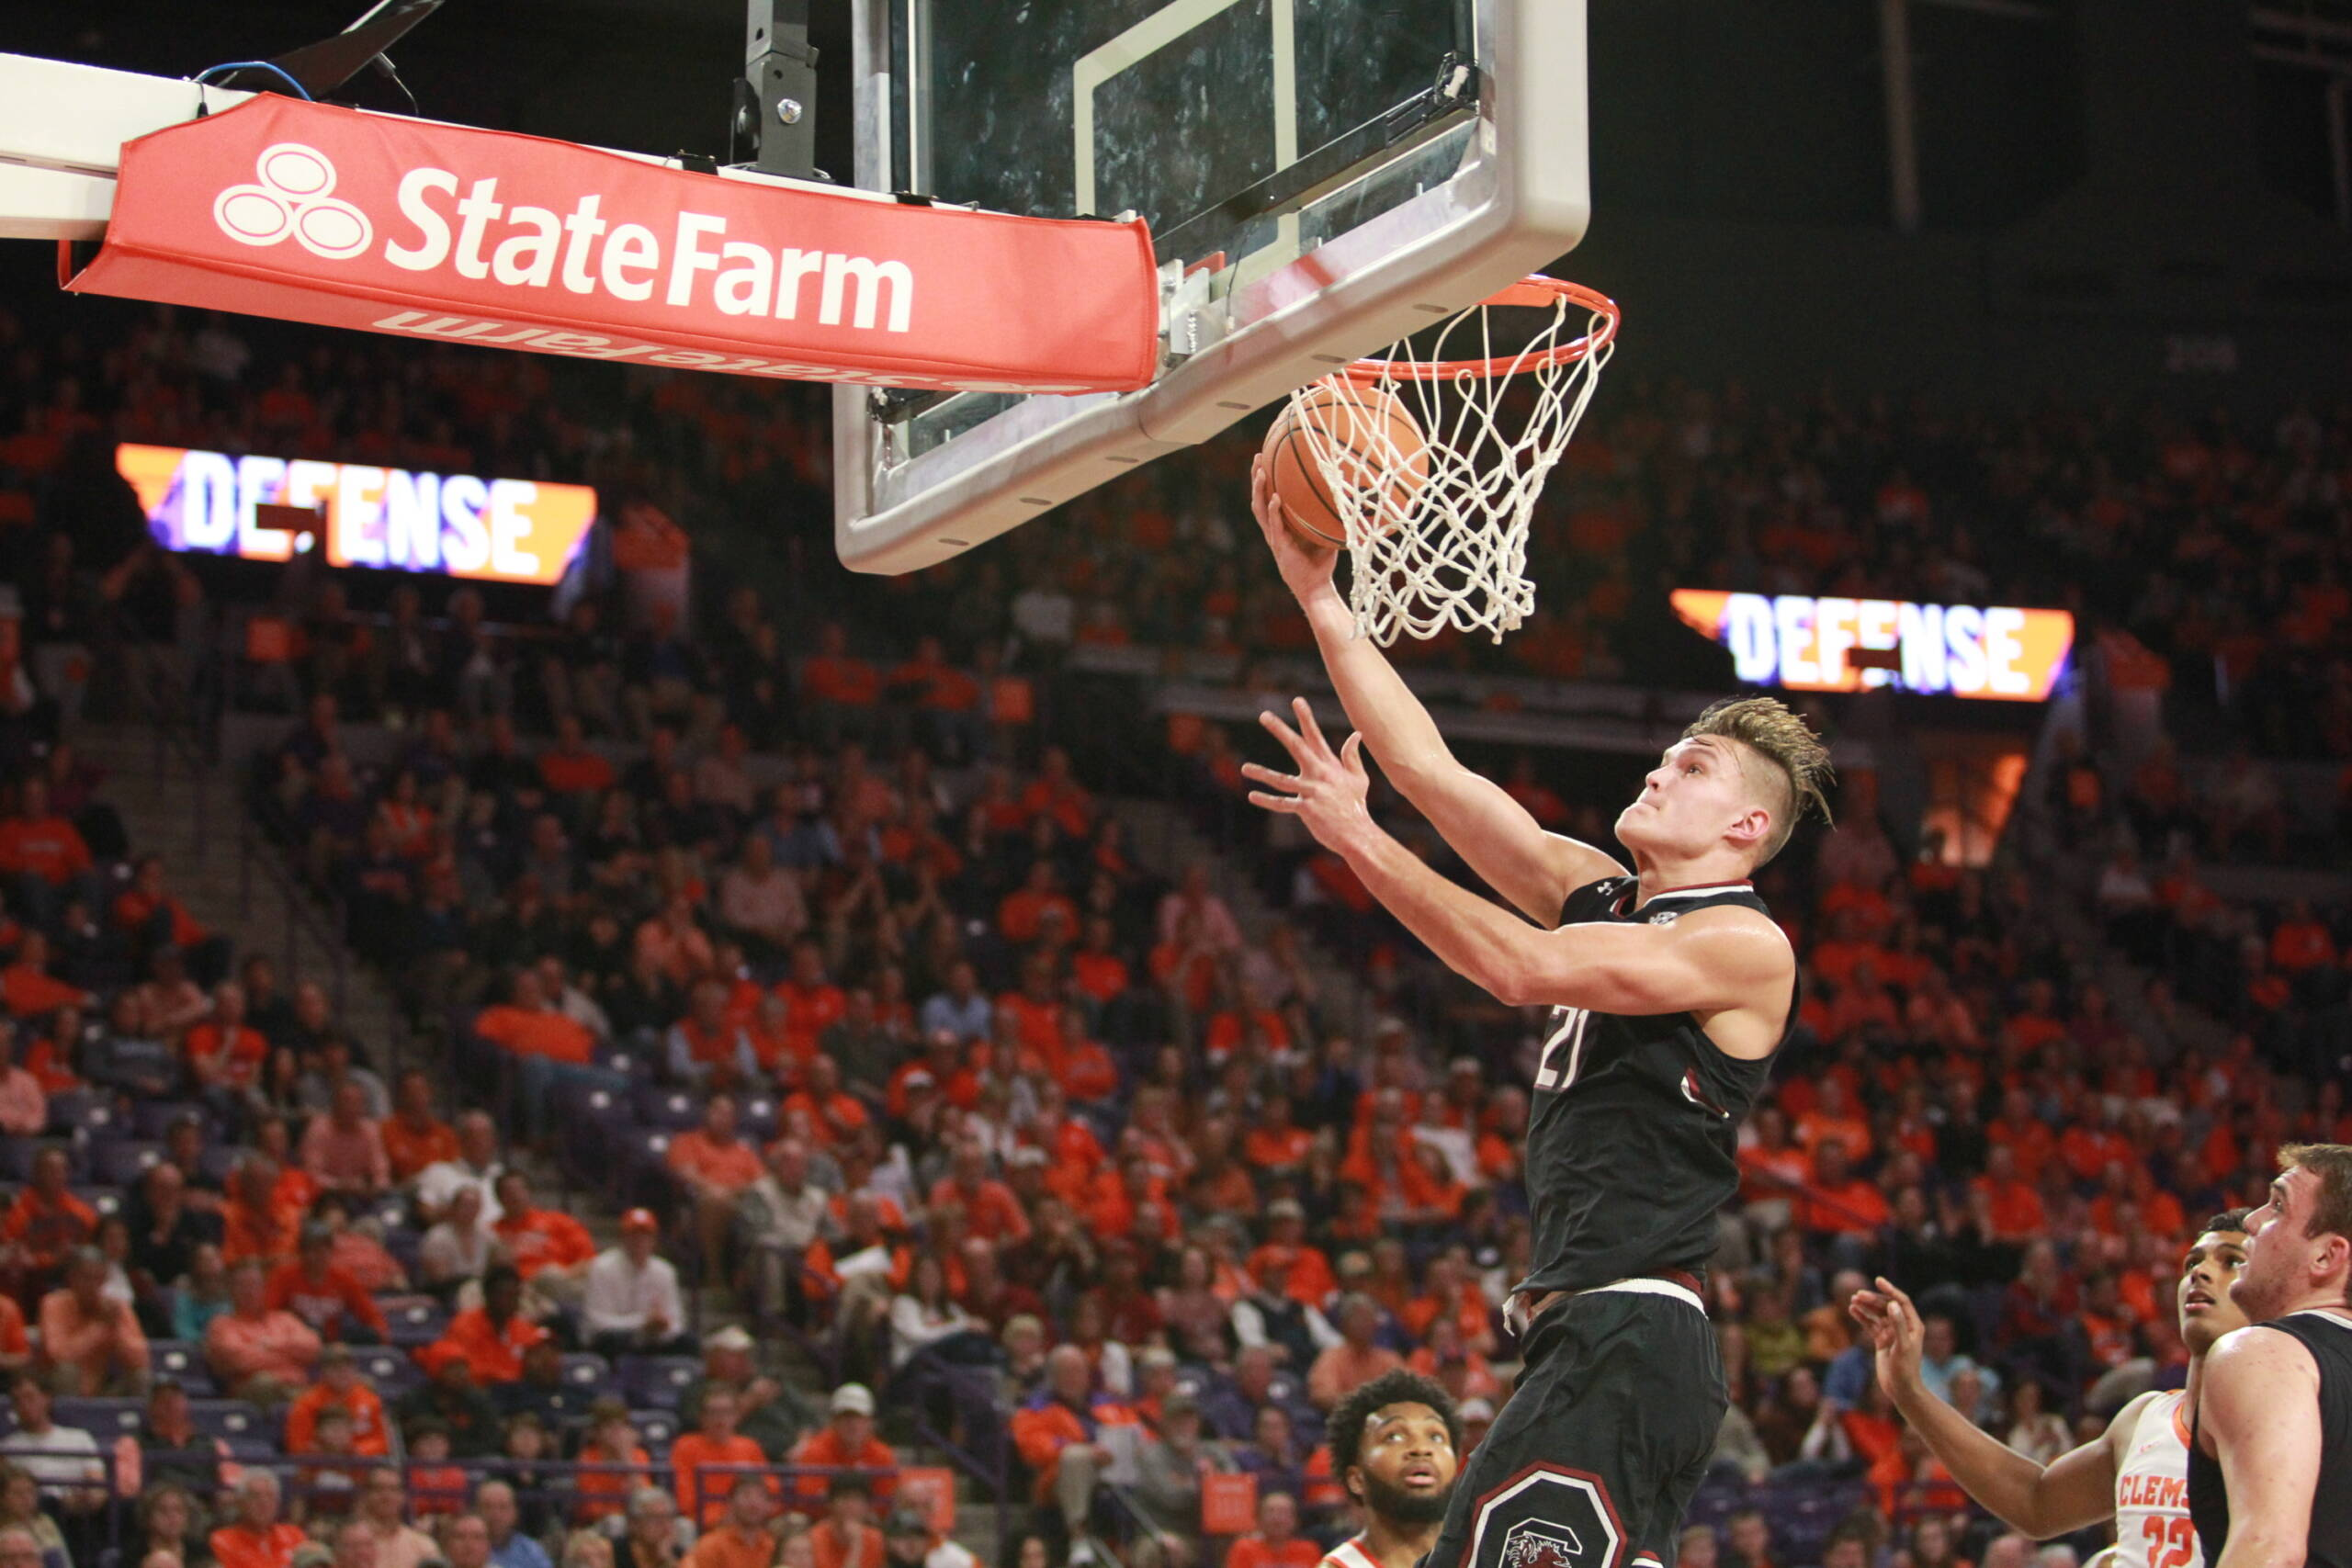 Reed's 3s lead Clemson to 64-48 win over South Carolina